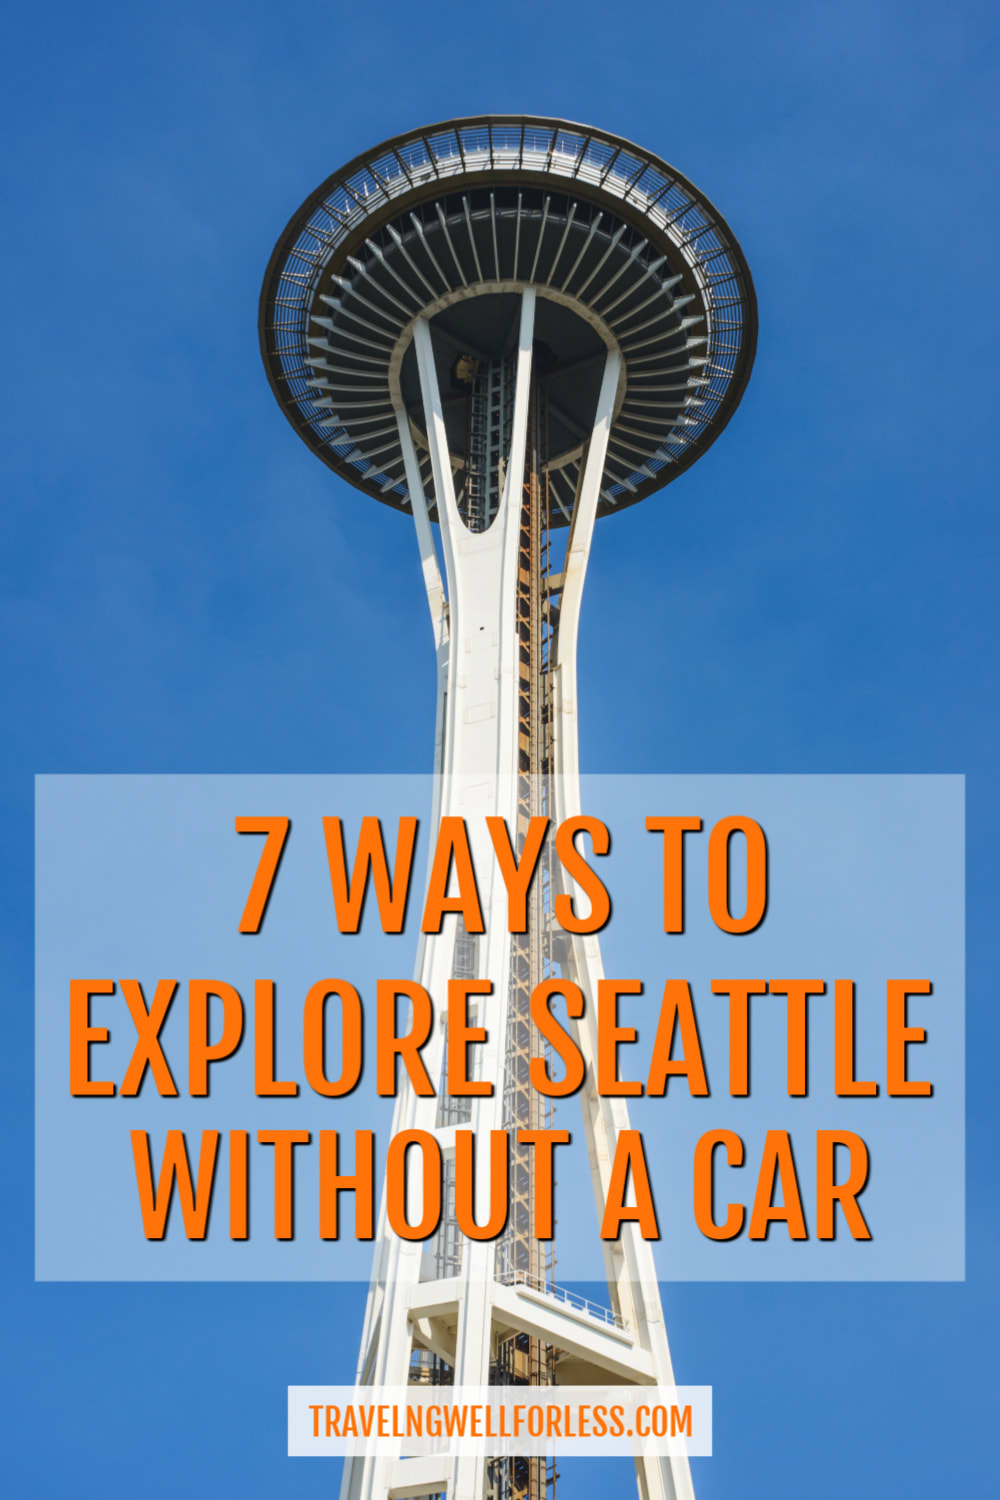 7 Ways to Explore Seattle Without a Car